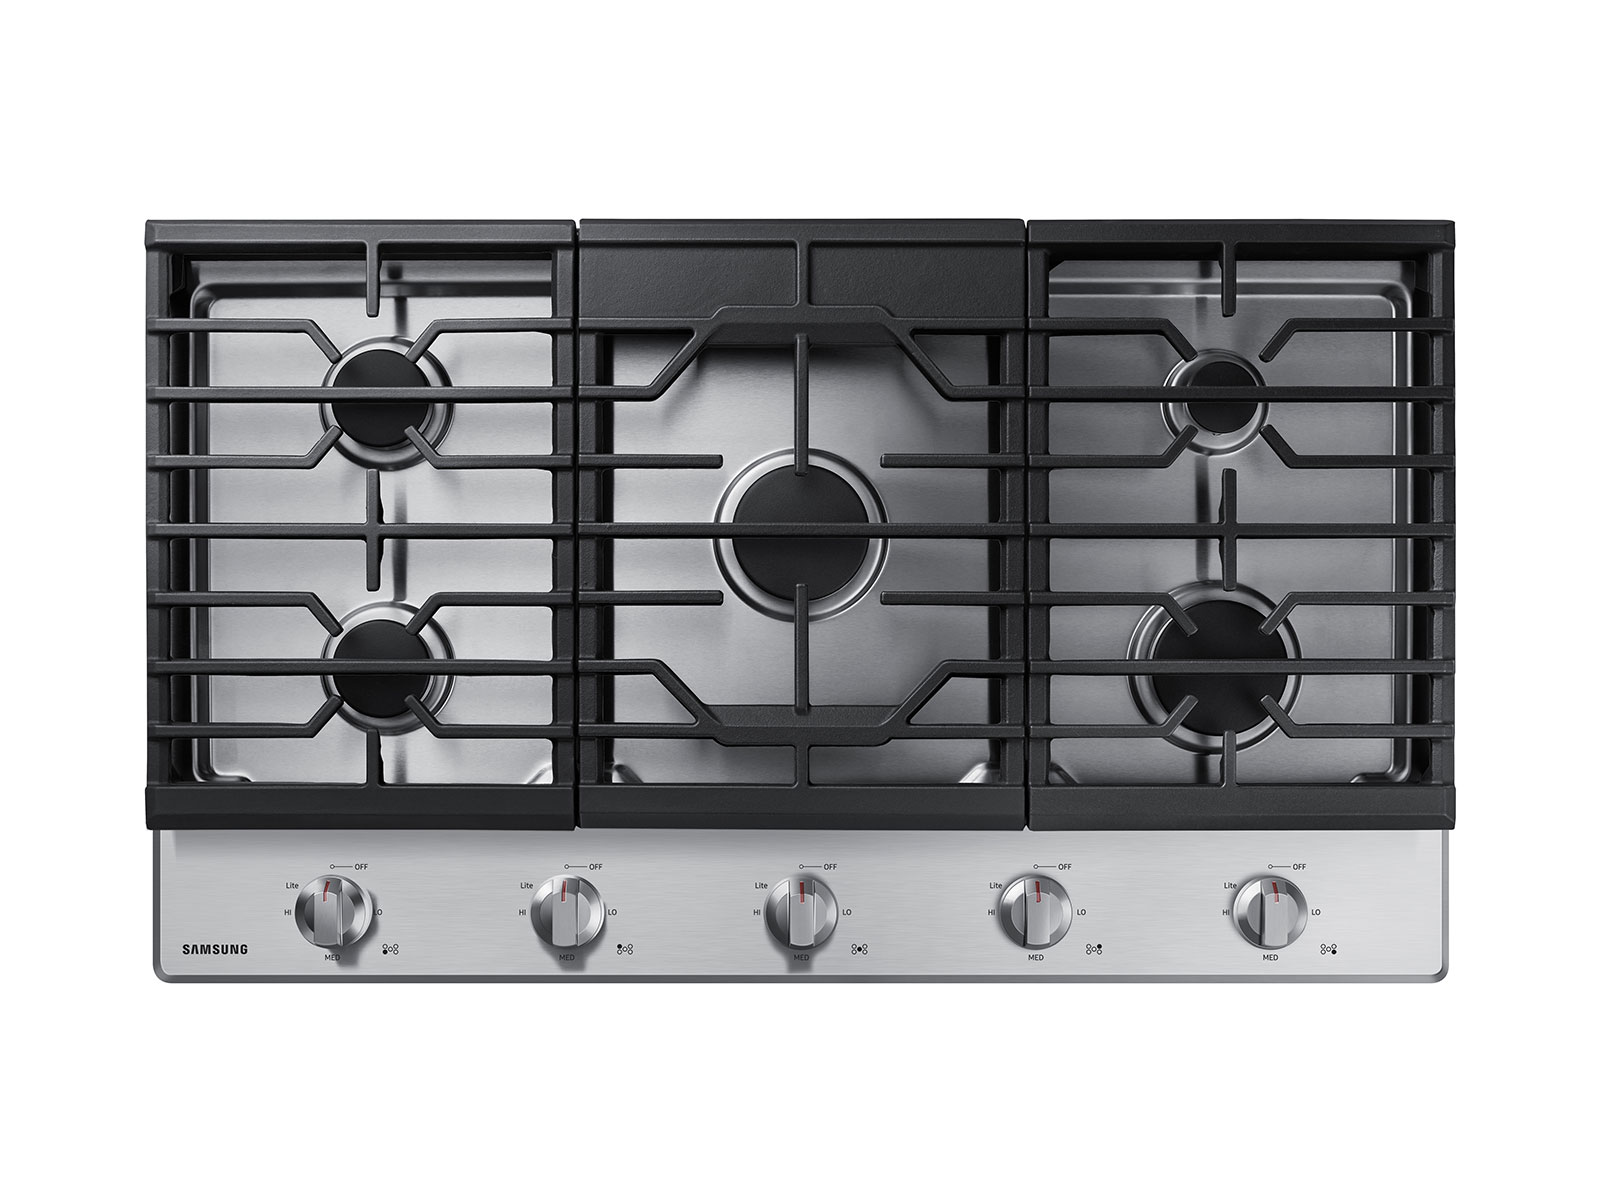 https://image-us.samsung.com/SamsungUS/home/home-appliances/cooktops-and-hoods/gas/pd/08292019/Gallery-Image-1-36_5310FS.jpg?$product-details-jpg$